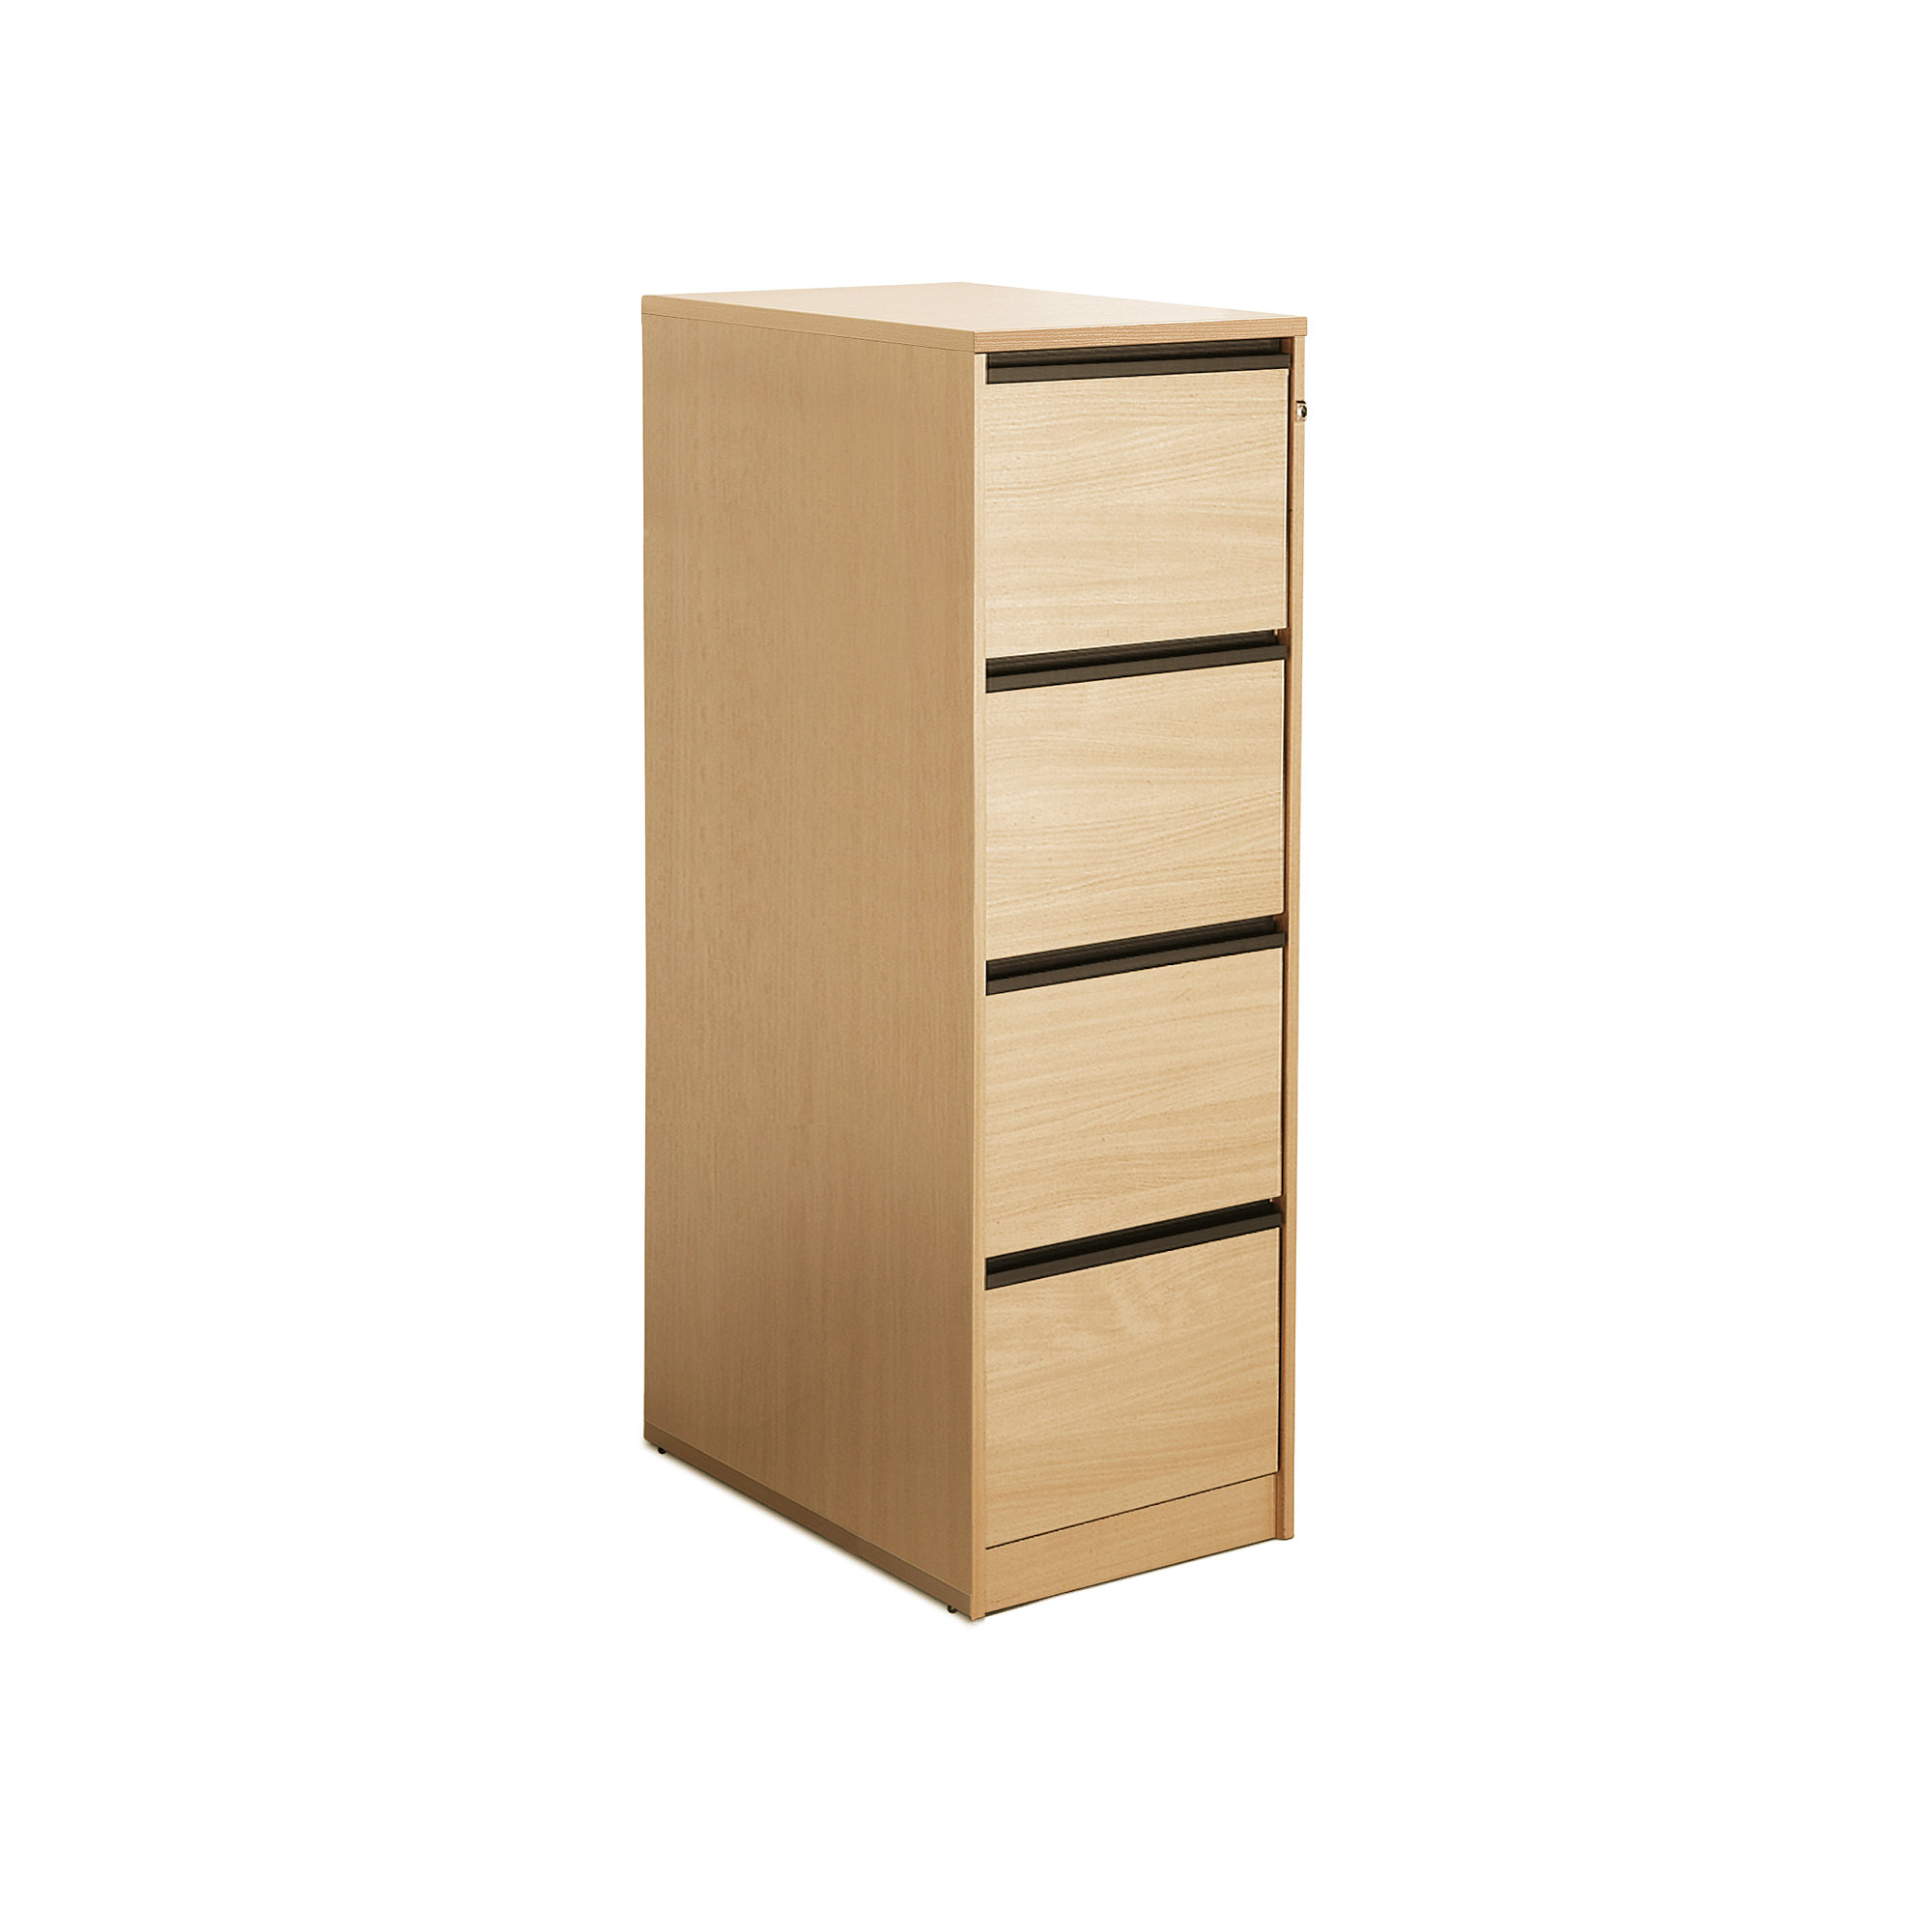 Wooden Foolscap Filing Cabinet 4 Drawers Oak Aj Products Ireland intended for proportions 2000 X 2000